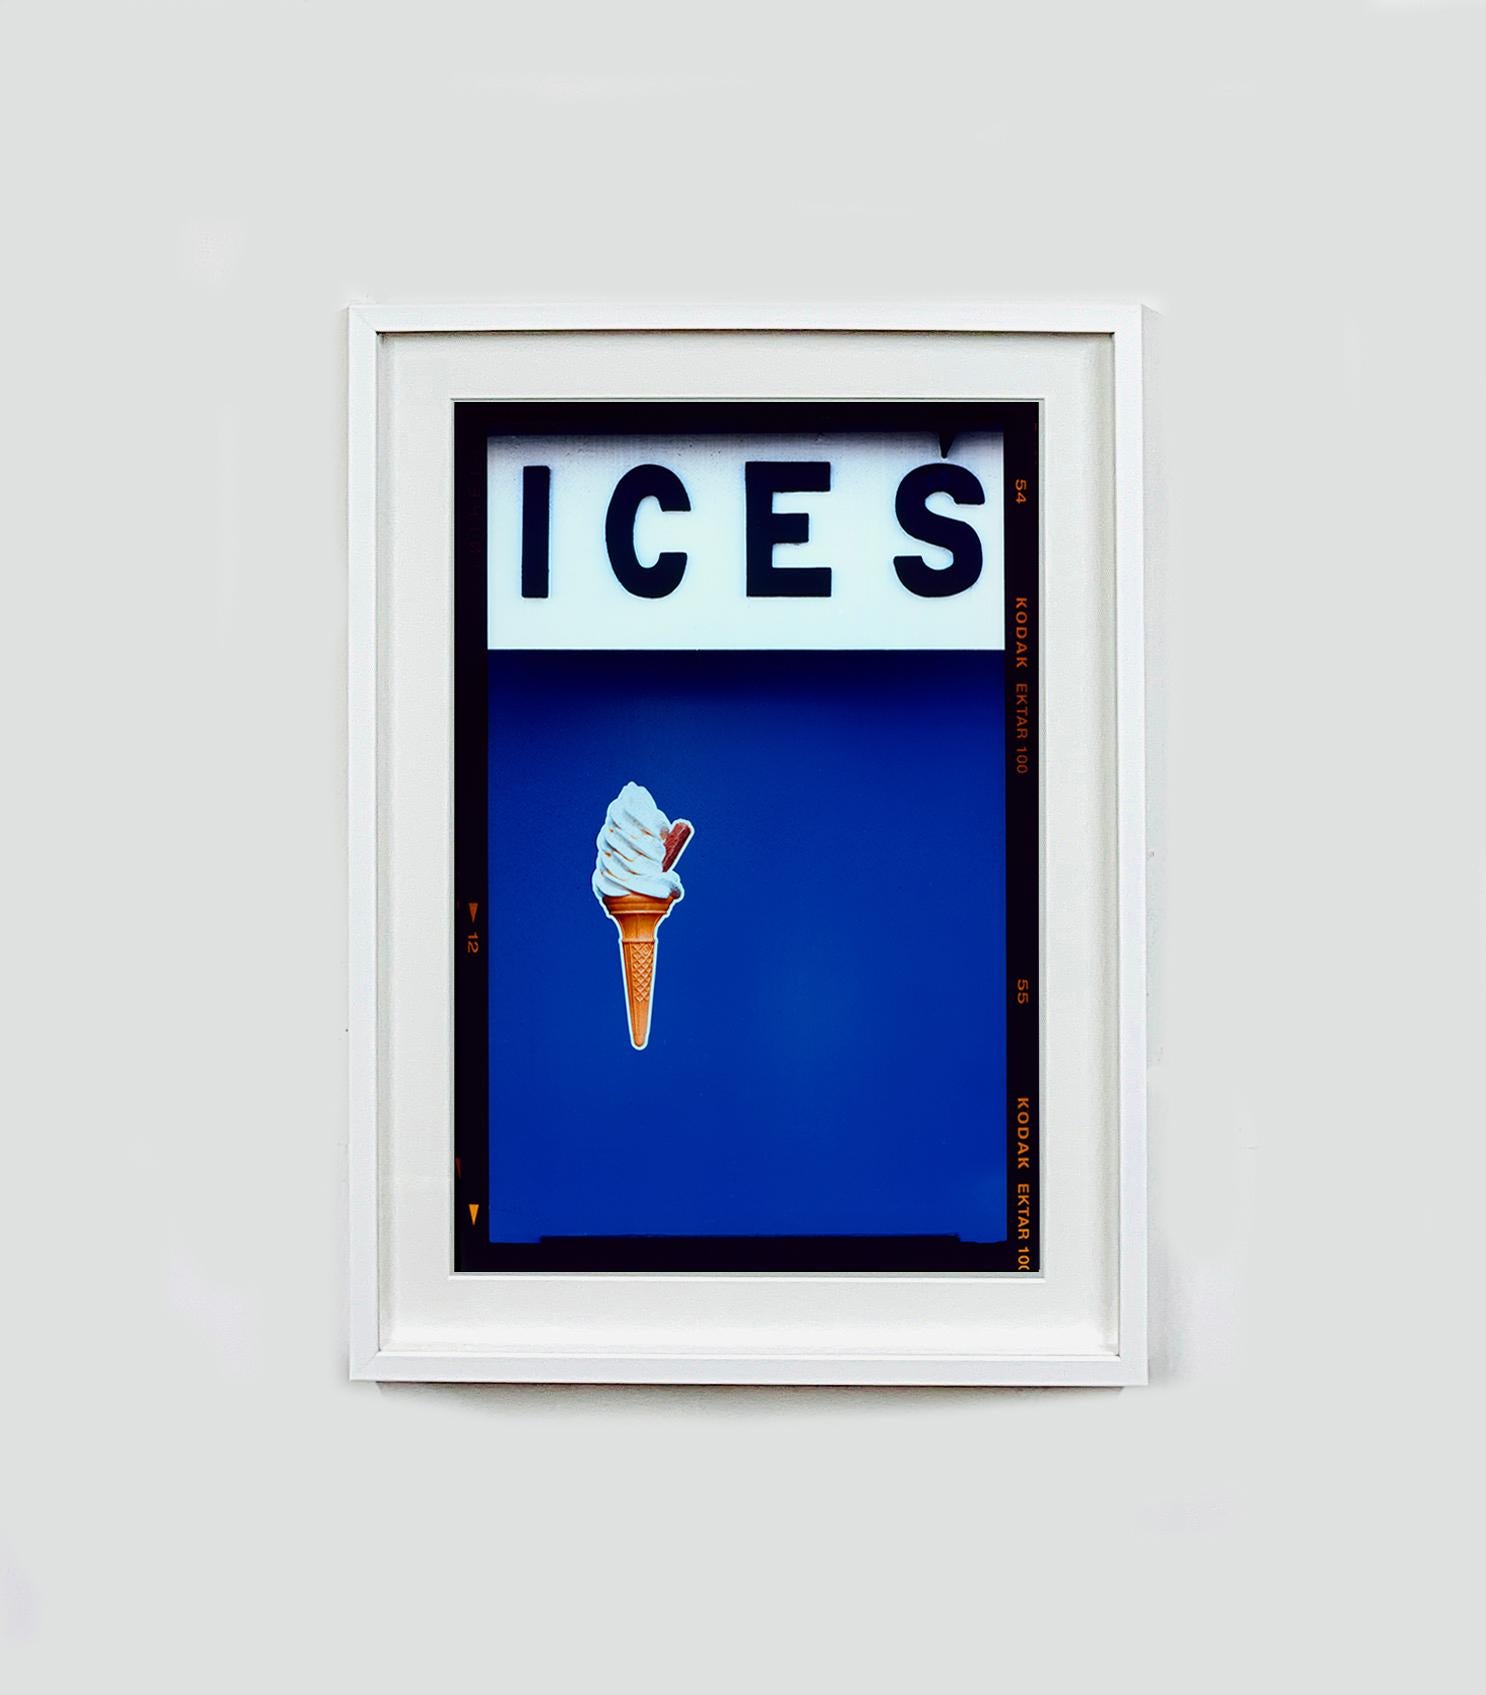 Ices, Bexhill-on-Sea - British seaside color photography - Contemporary Photograph by Richard Heeps